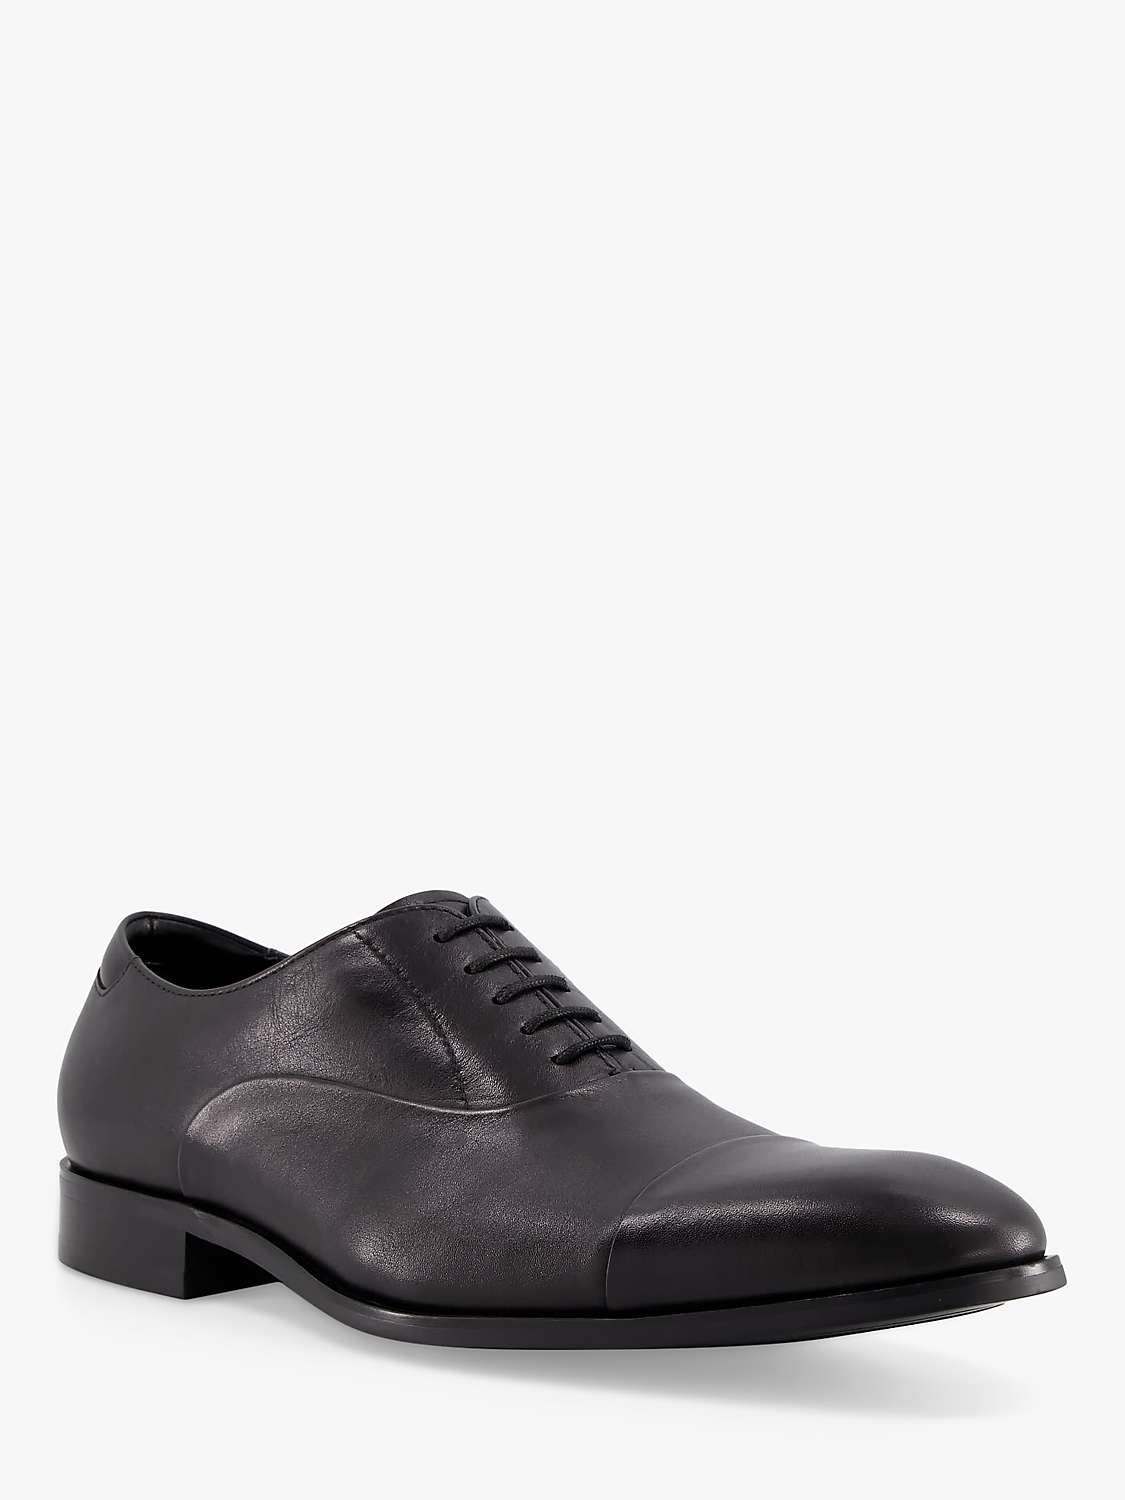 Buy Dune Wide Fit Secrecy Leather Derby Shoes, Black Online at johnlewis.com